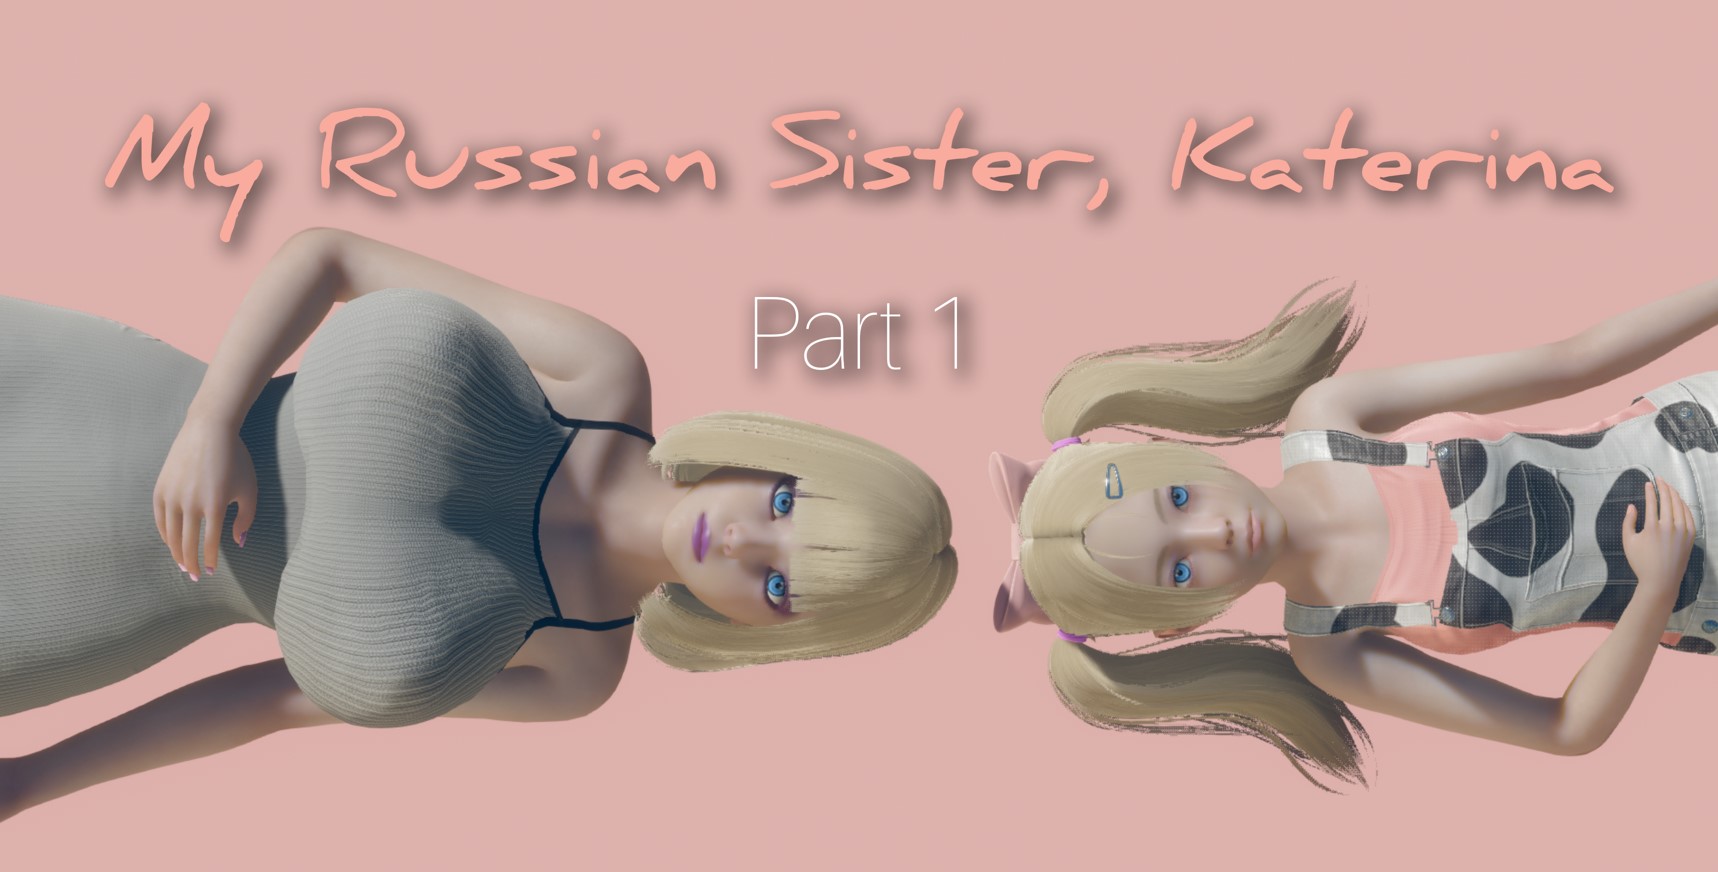 Katerina, the Russian sister